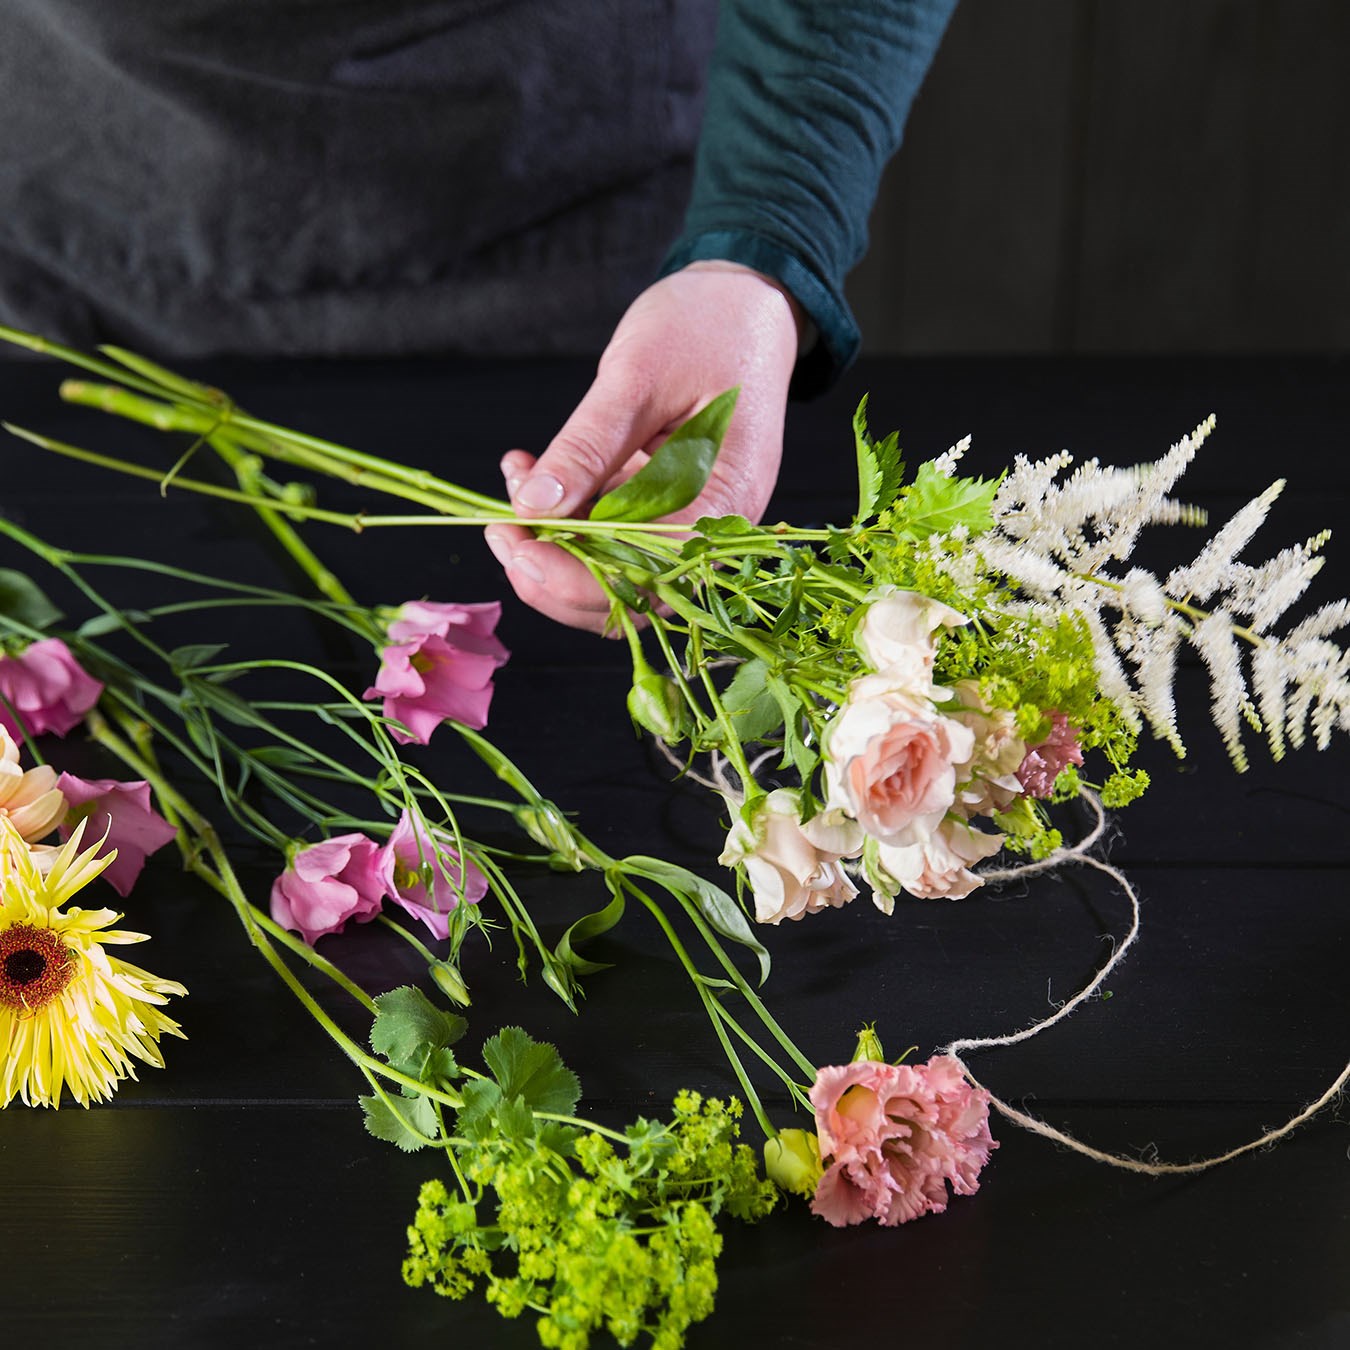 product image for Bouquet of seasonal cut flowers, Designers Choice